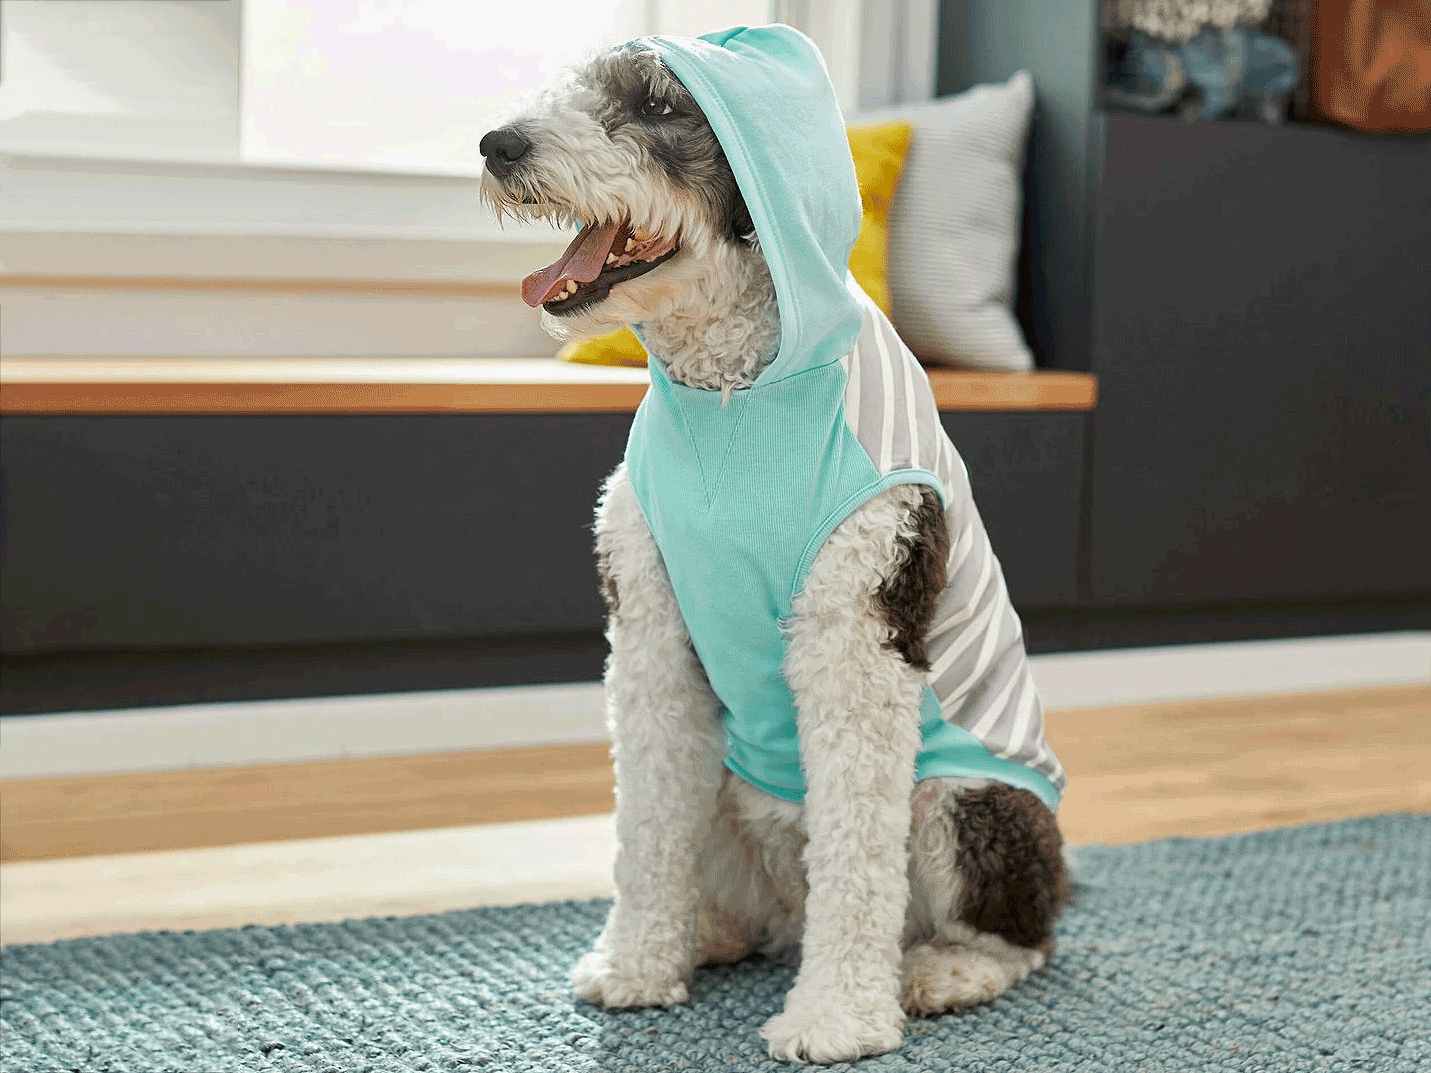 poodle mix dog wearing light blue and gray hooded sweatshirt